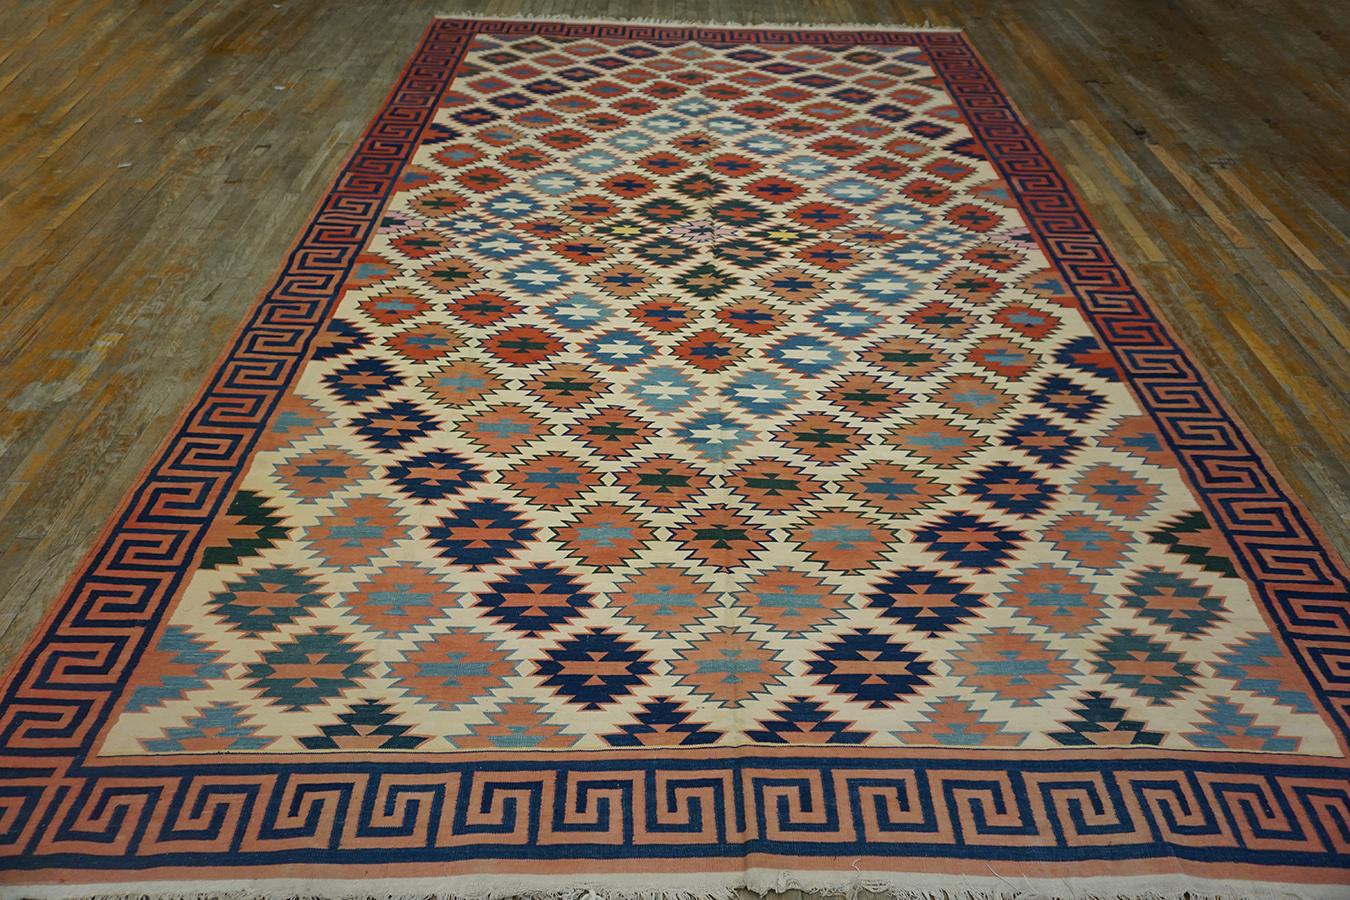 Antique Dhurrie rug, size: 8' 9''x 13' 8''.